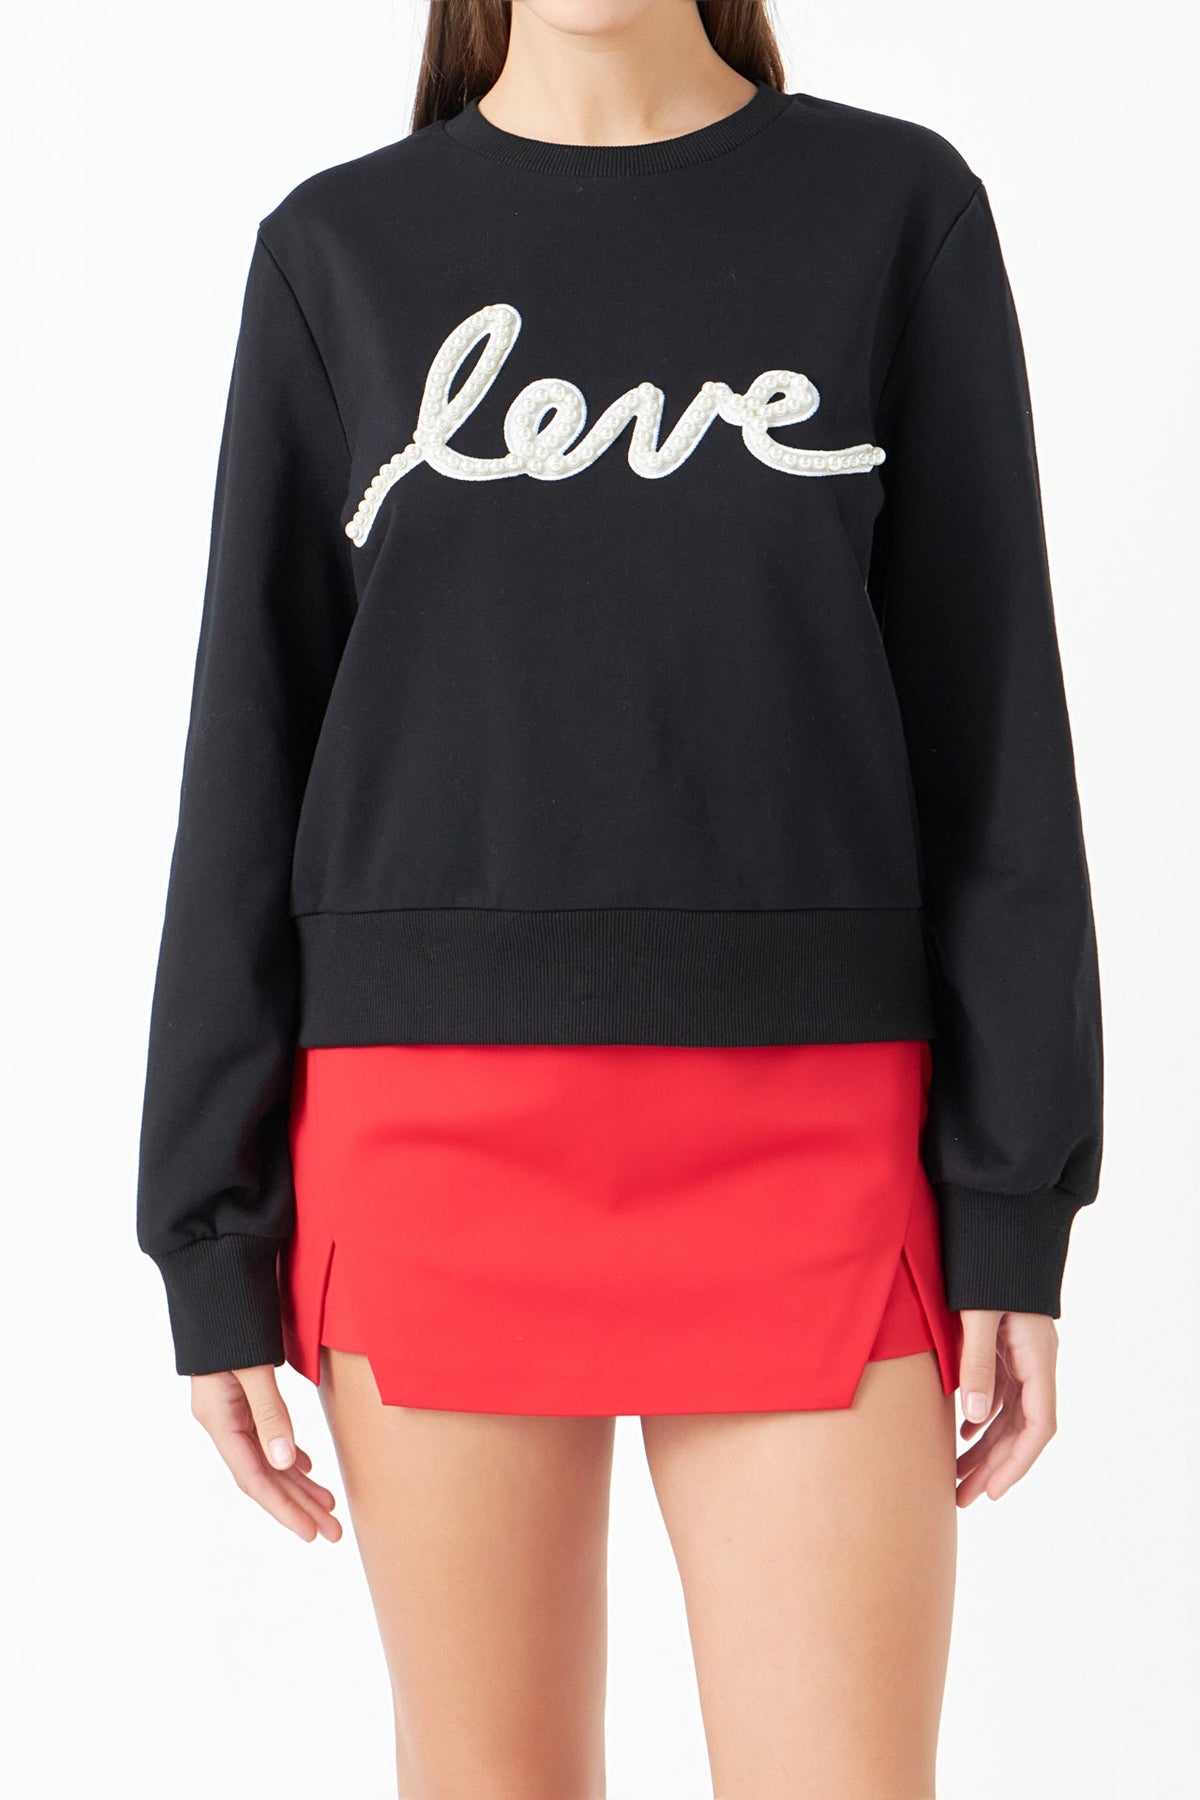 ENDLESS ROSE - Pearl Love Sweatshirt - HOODIES & SWEATSHIRTS available at Objectrare